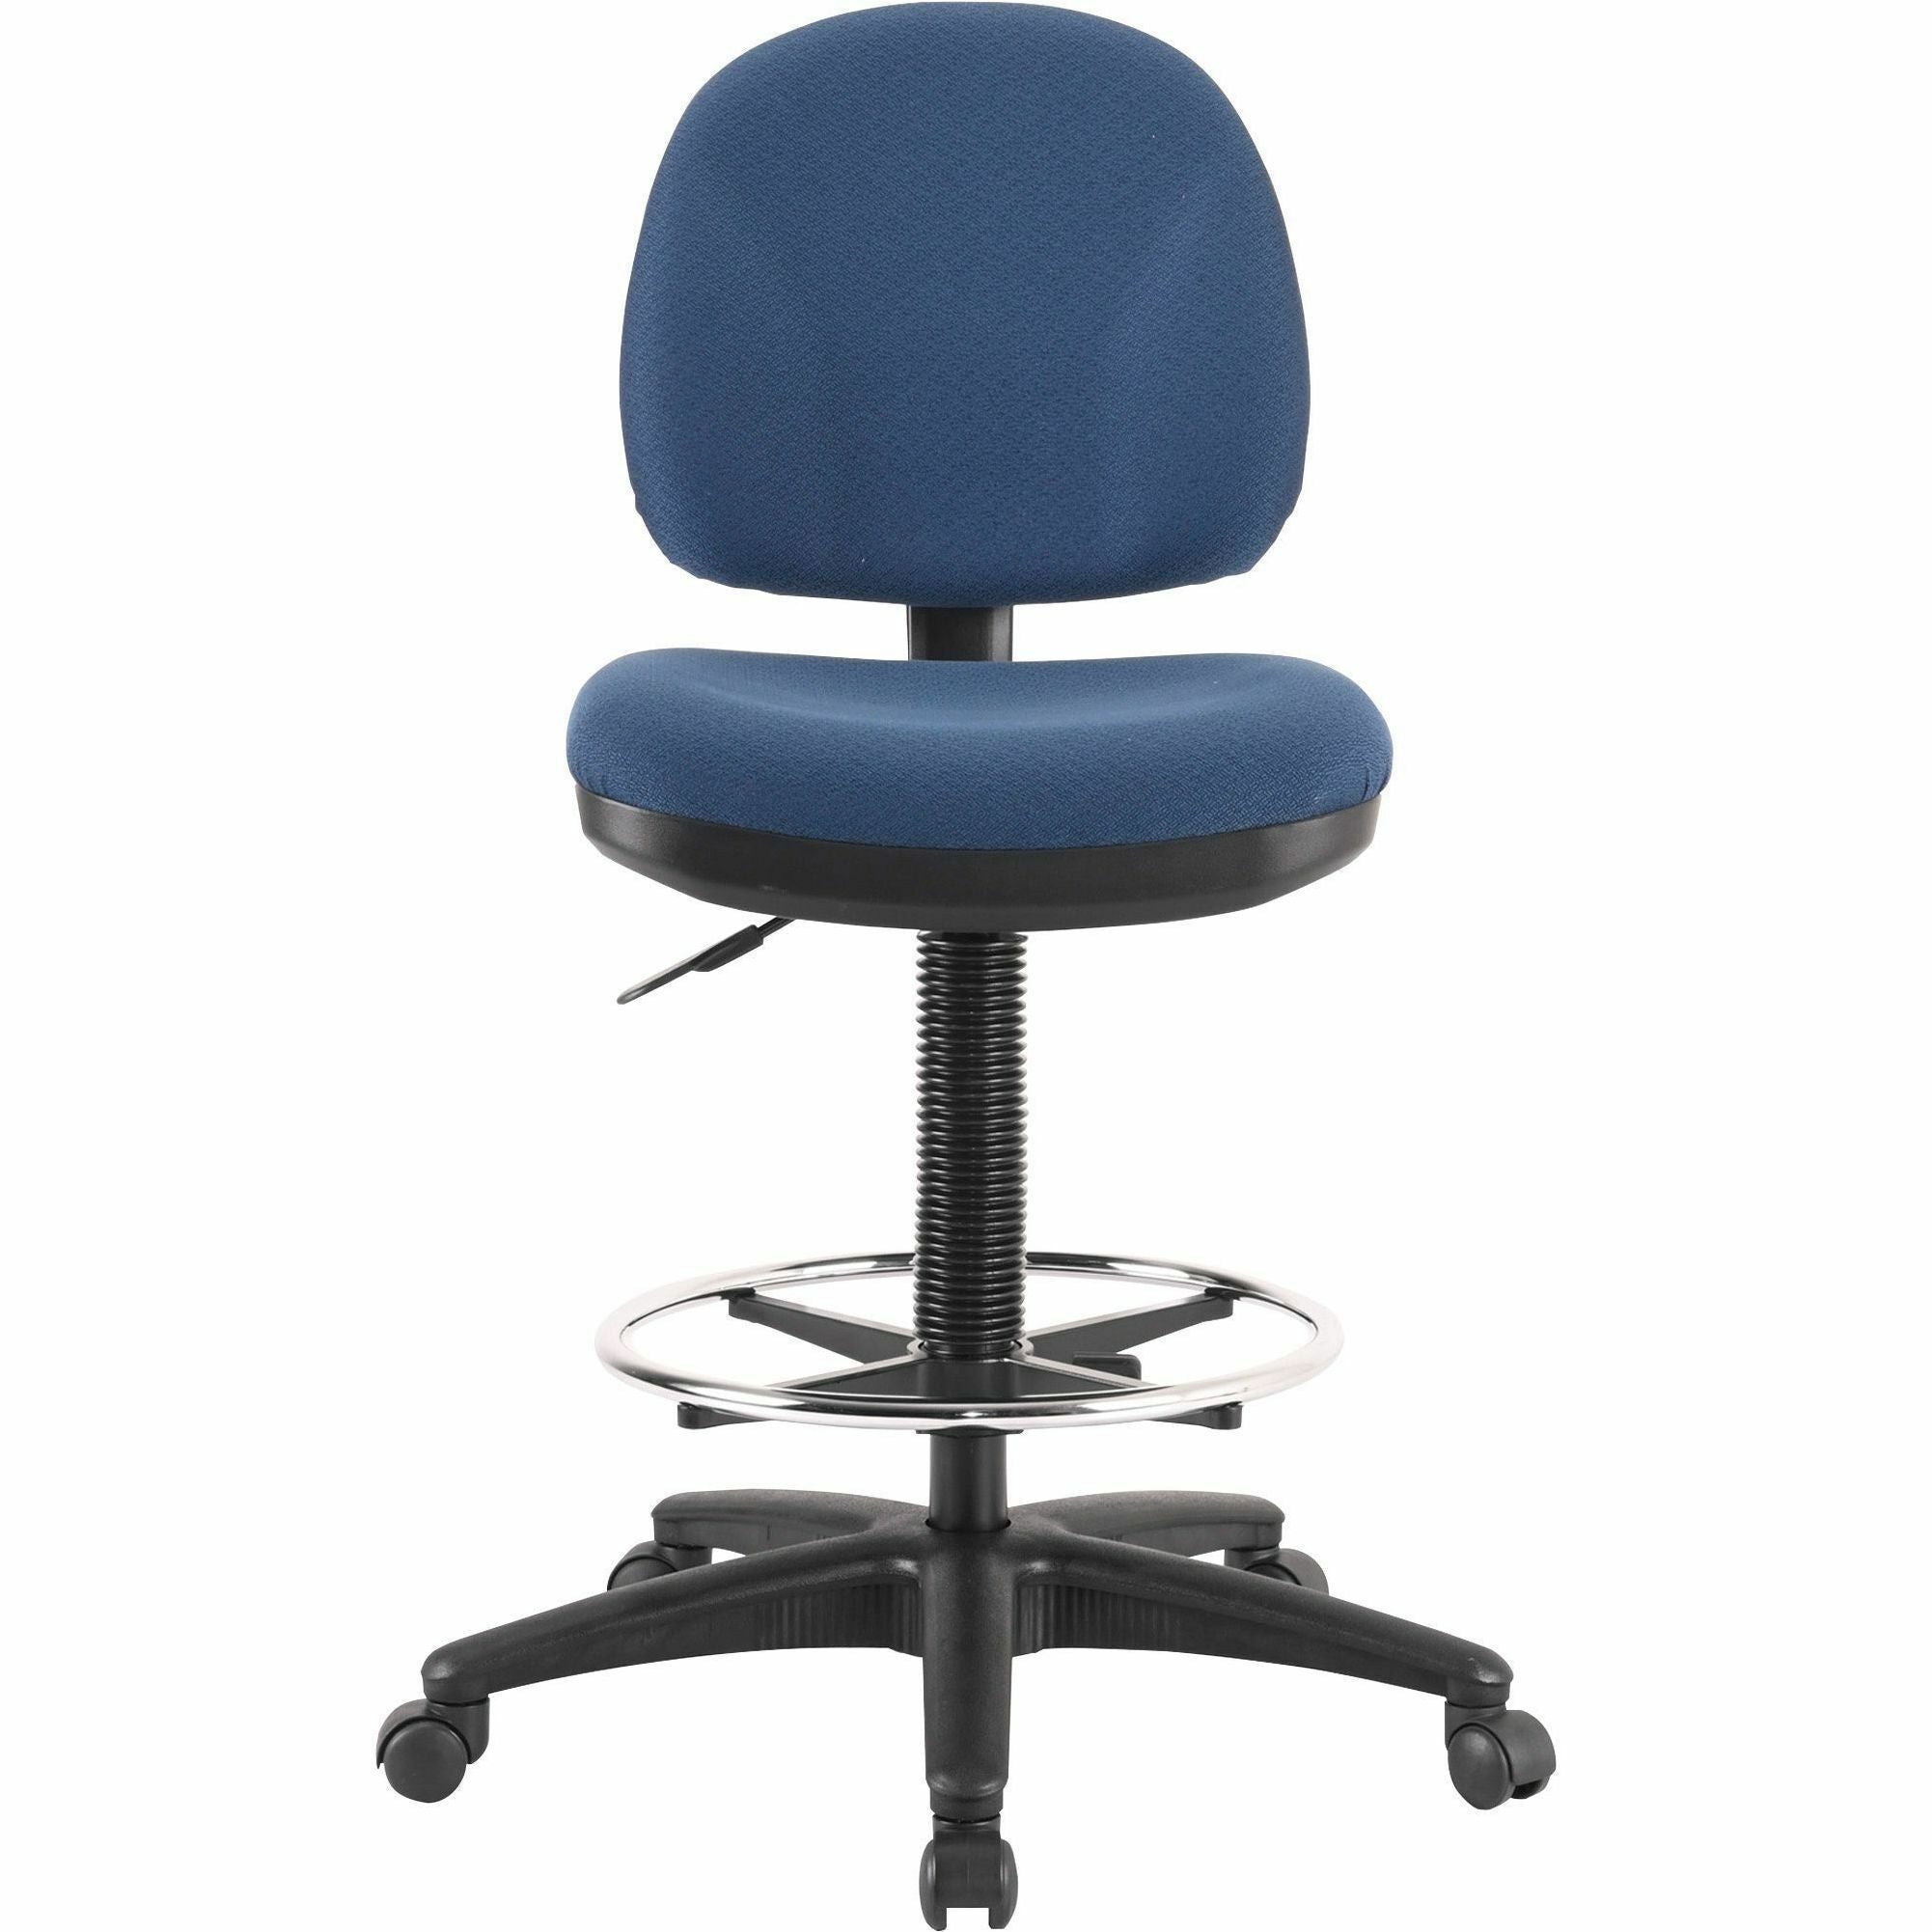 Lorell Millenia Series Adjustable Task Stool with Back - Blue Seat - Blue - 1 Each - 